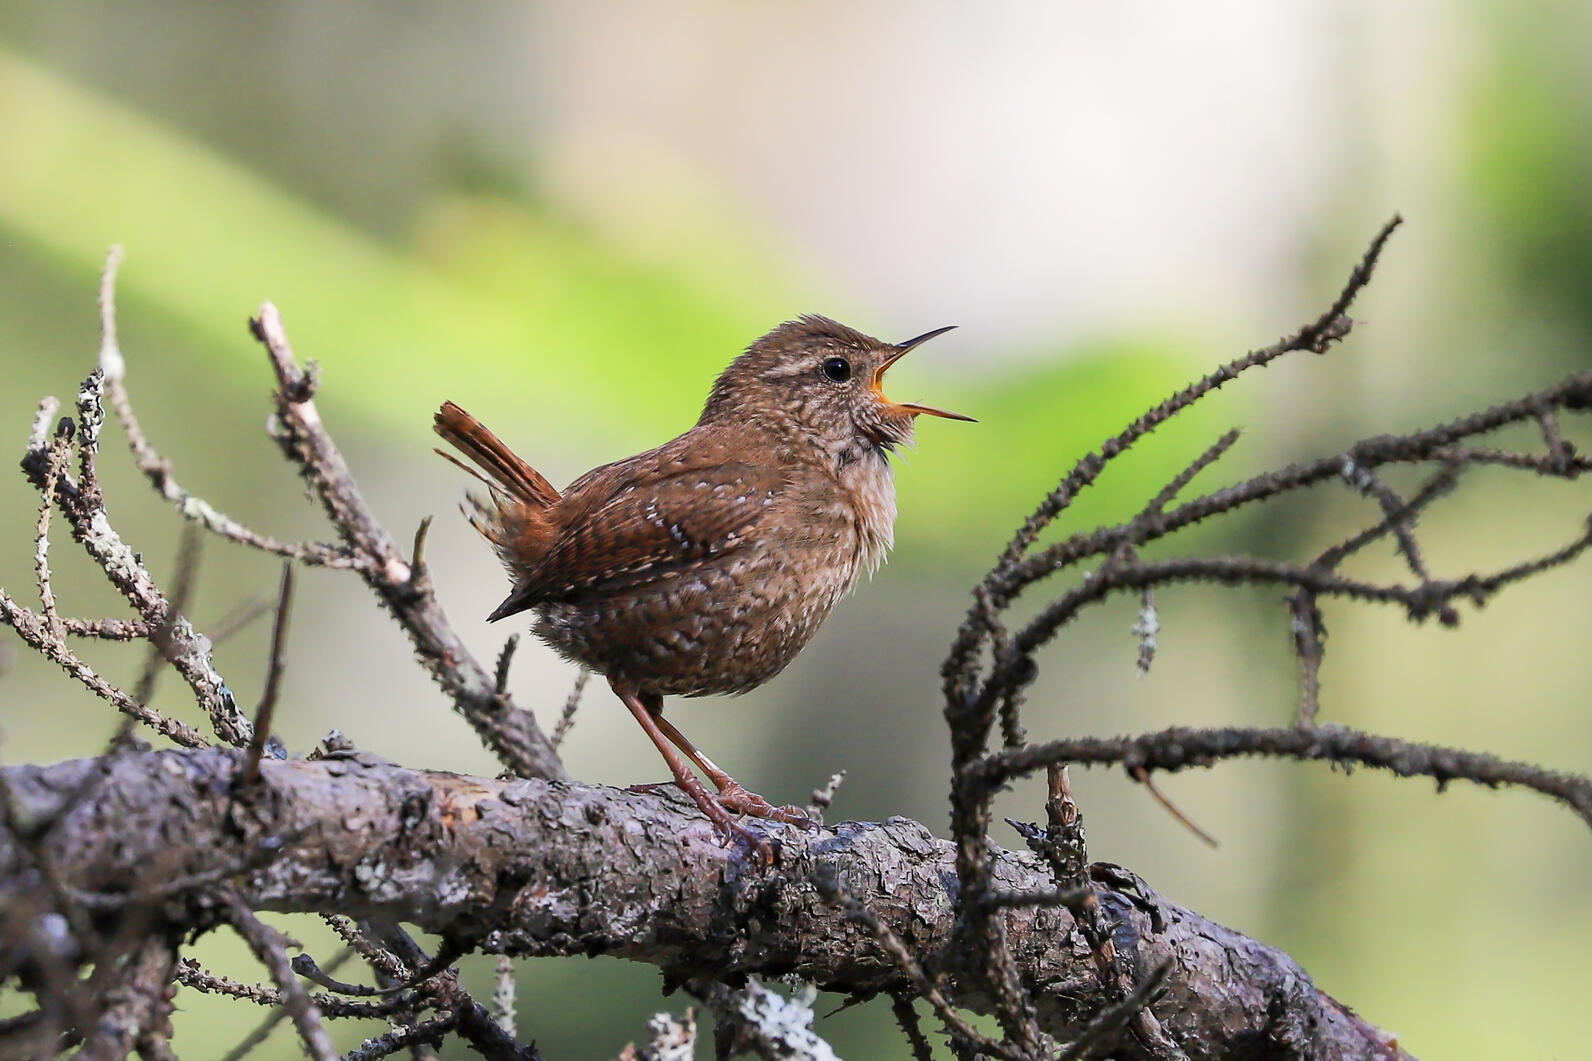 Winter Wren perched on a tree branch singing with its beak wide open